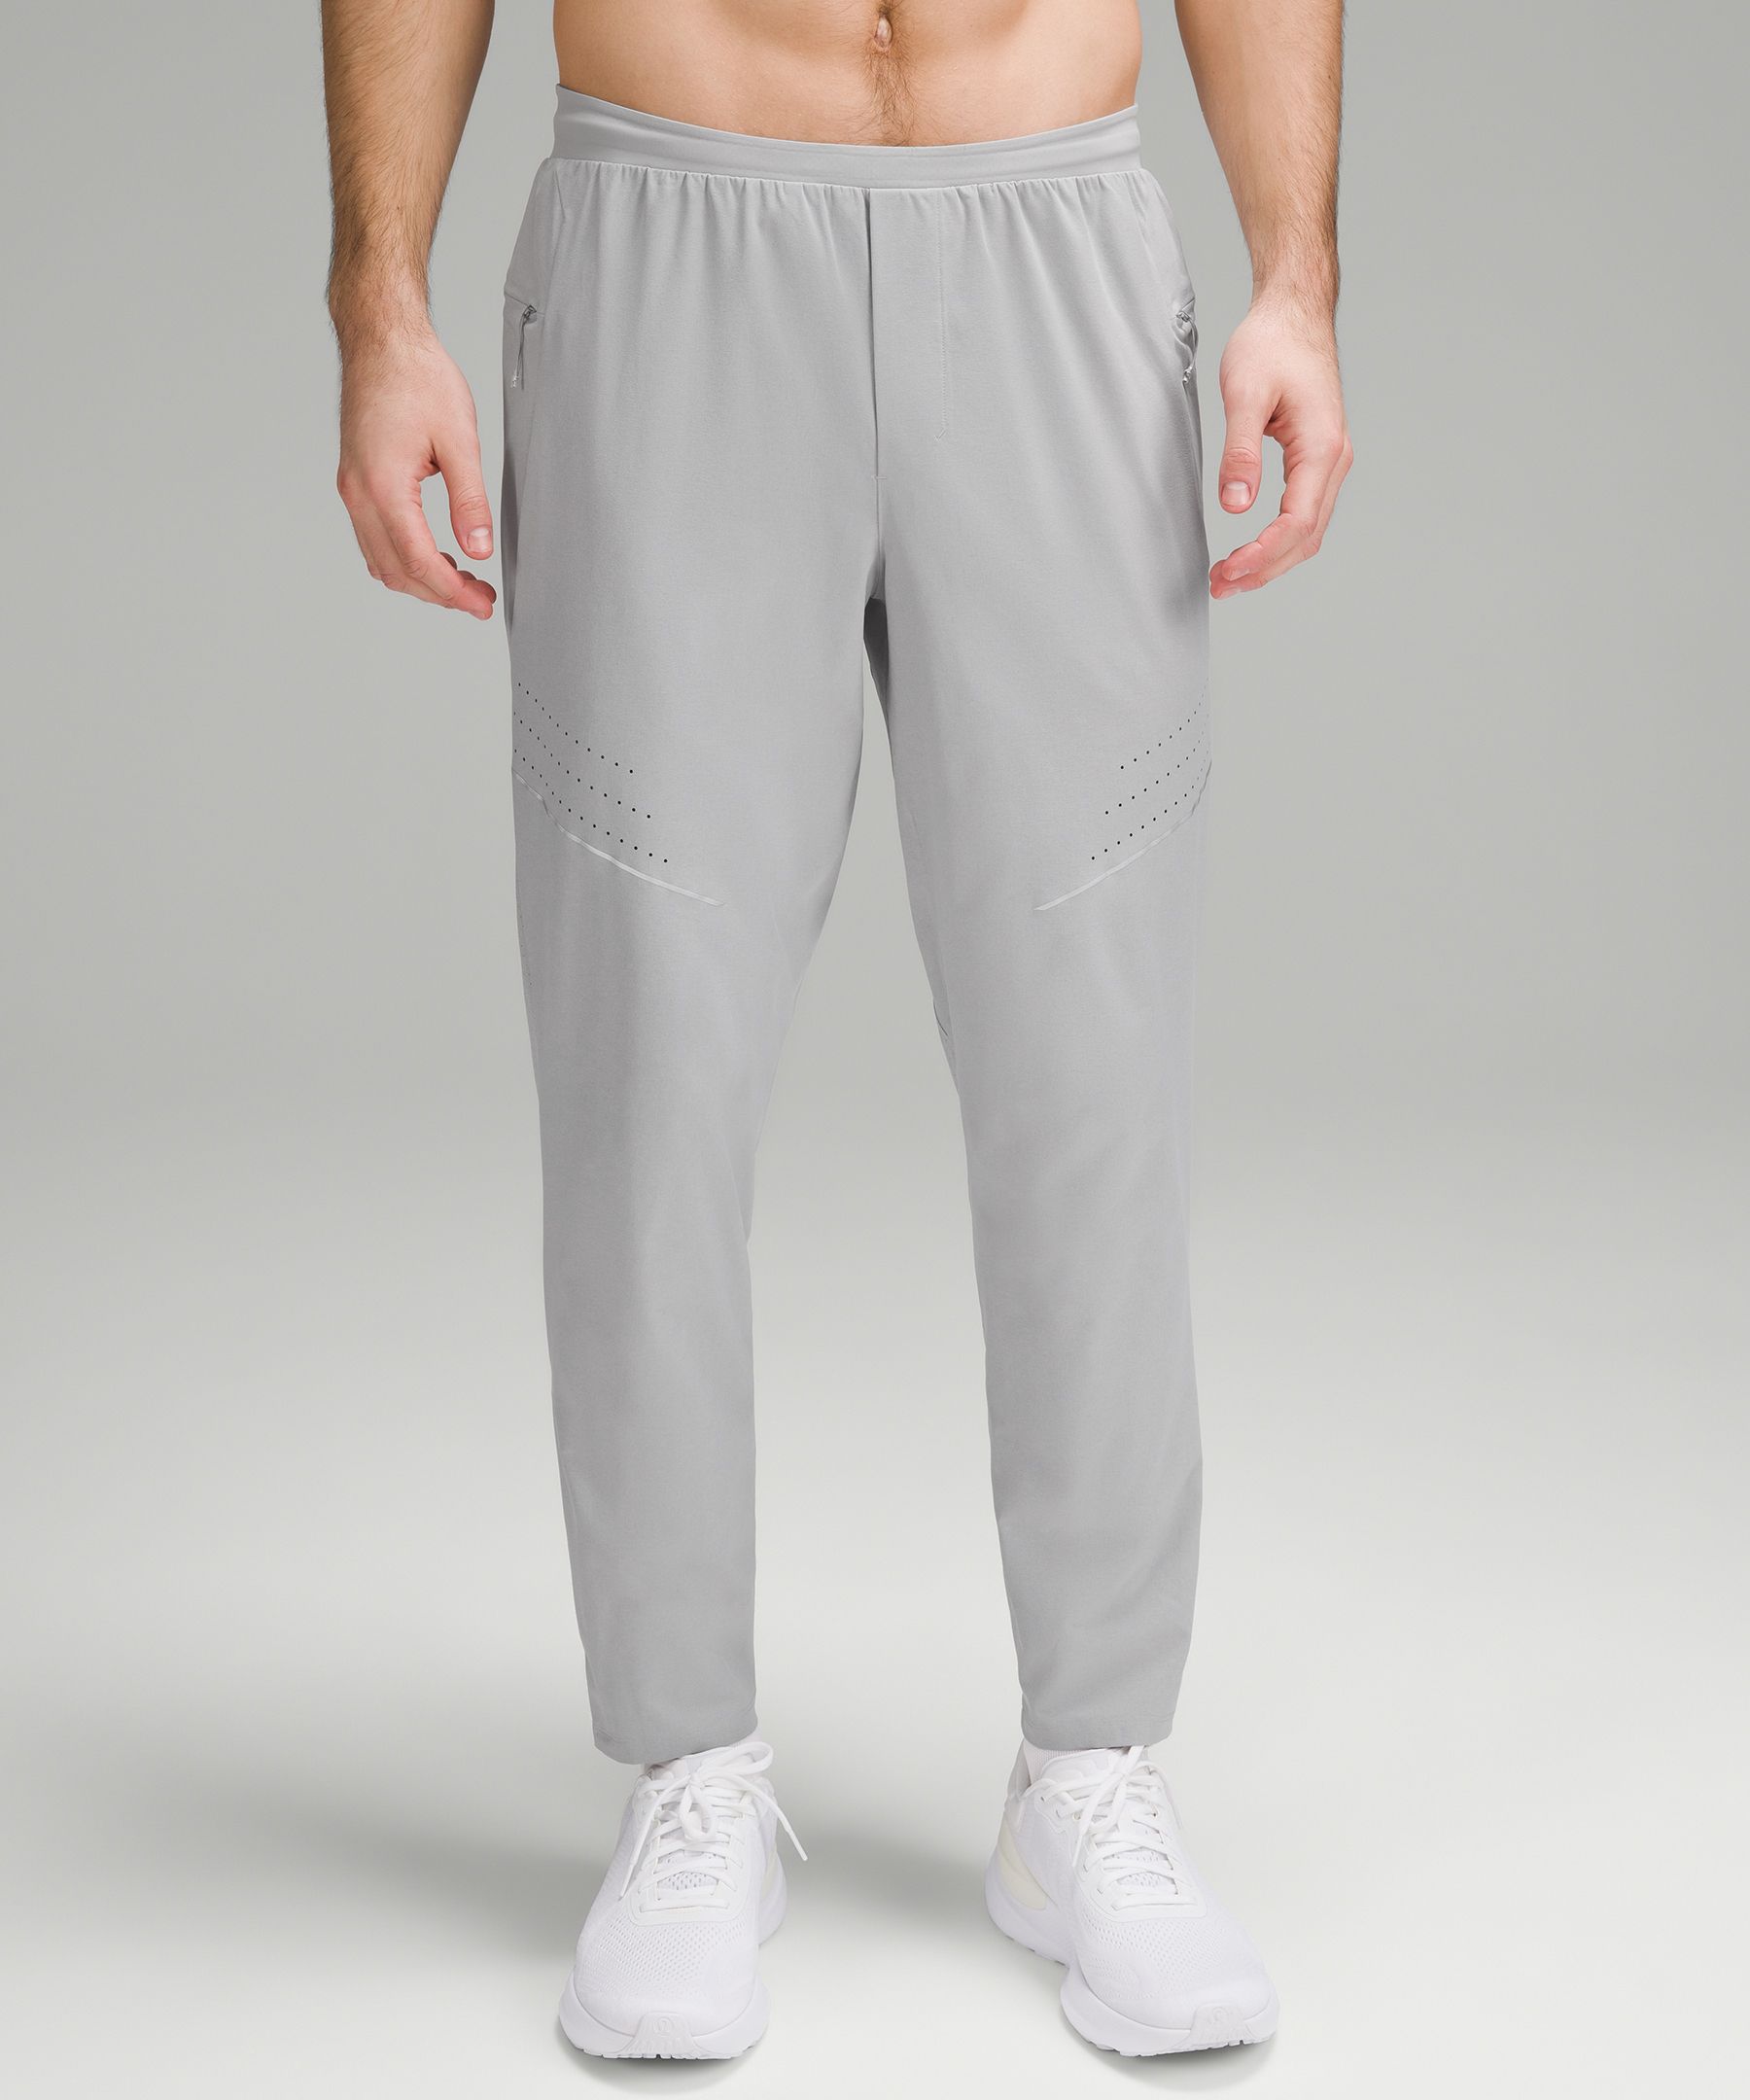 Fast and Free Running Pant, Men's Joggers